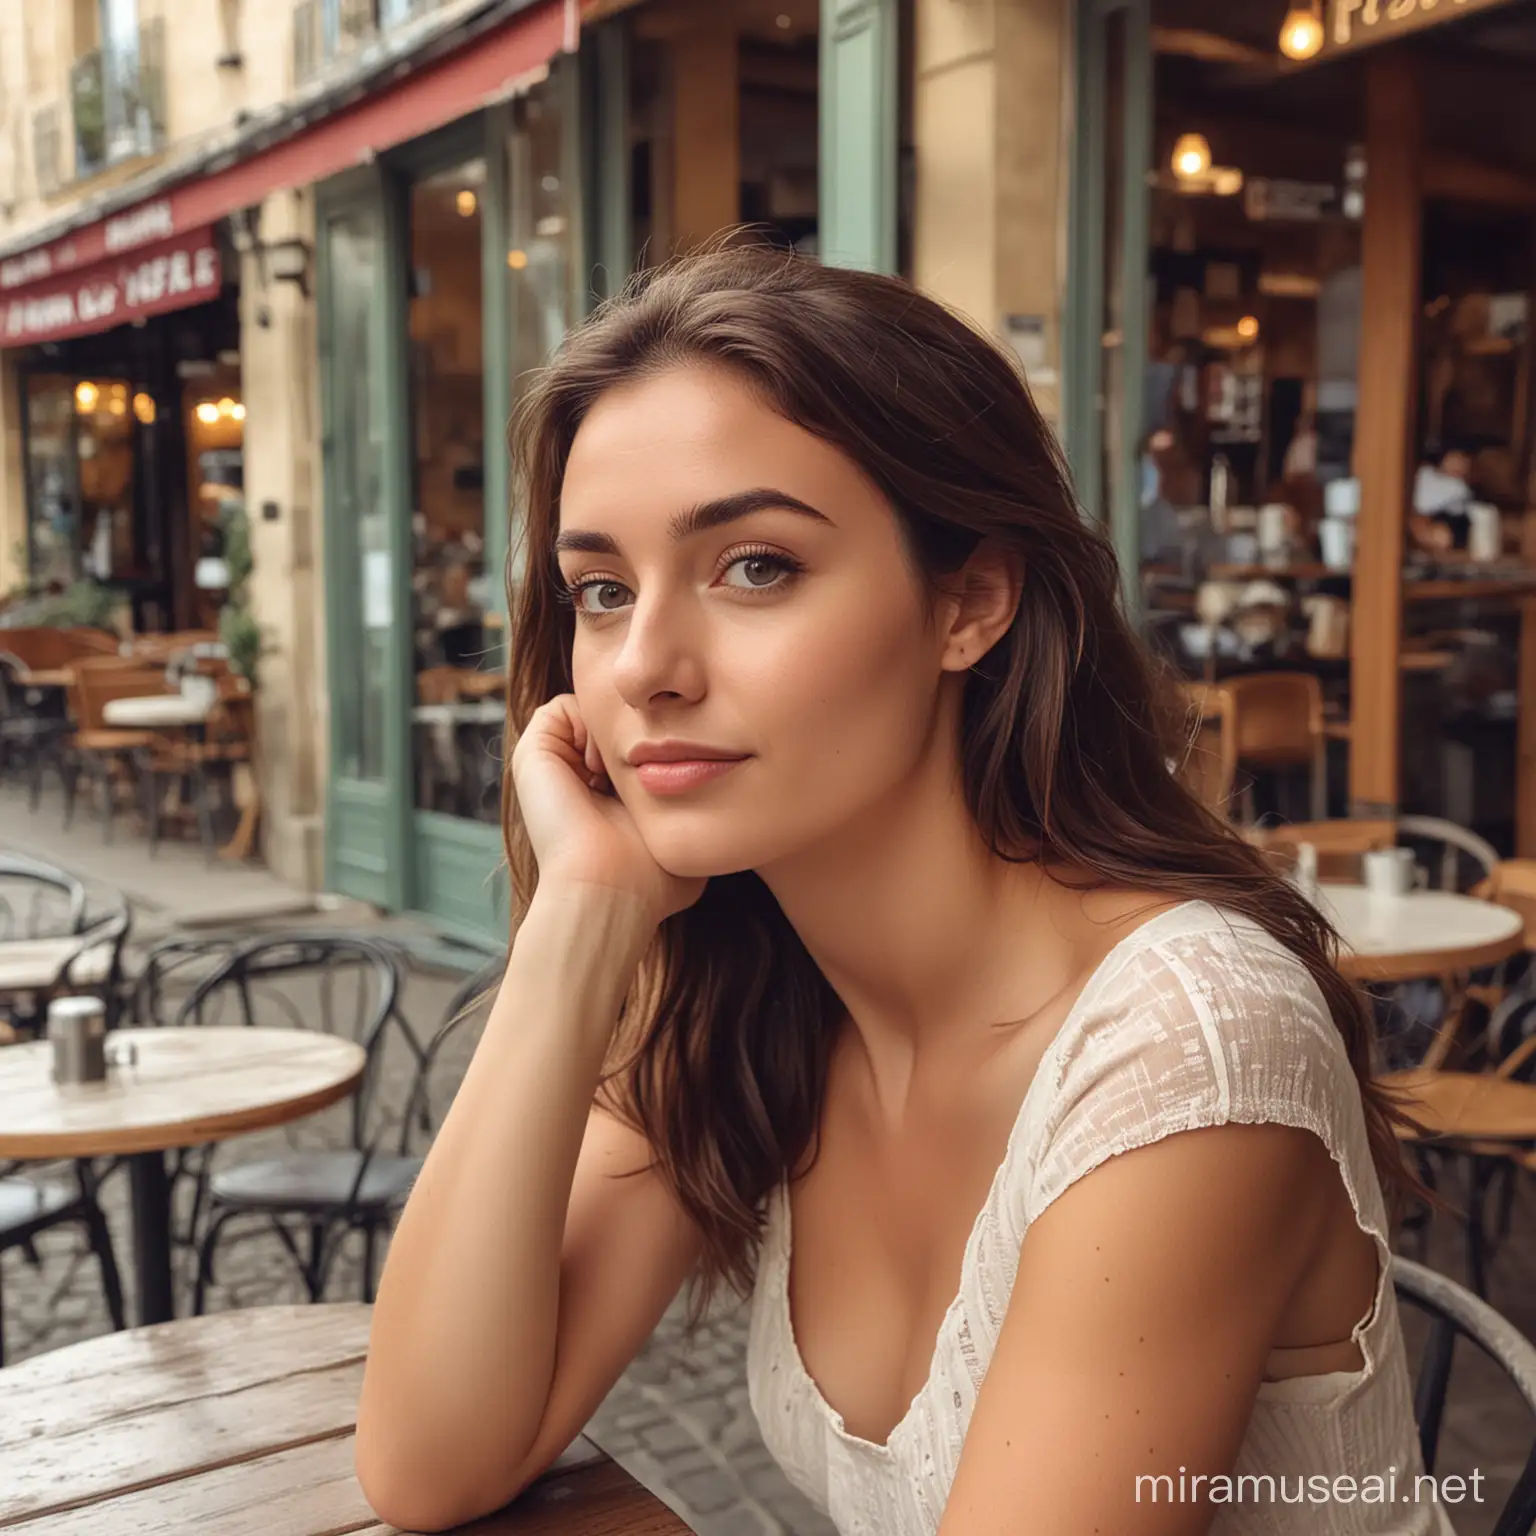 A beautiful woman staring out of a french cafe